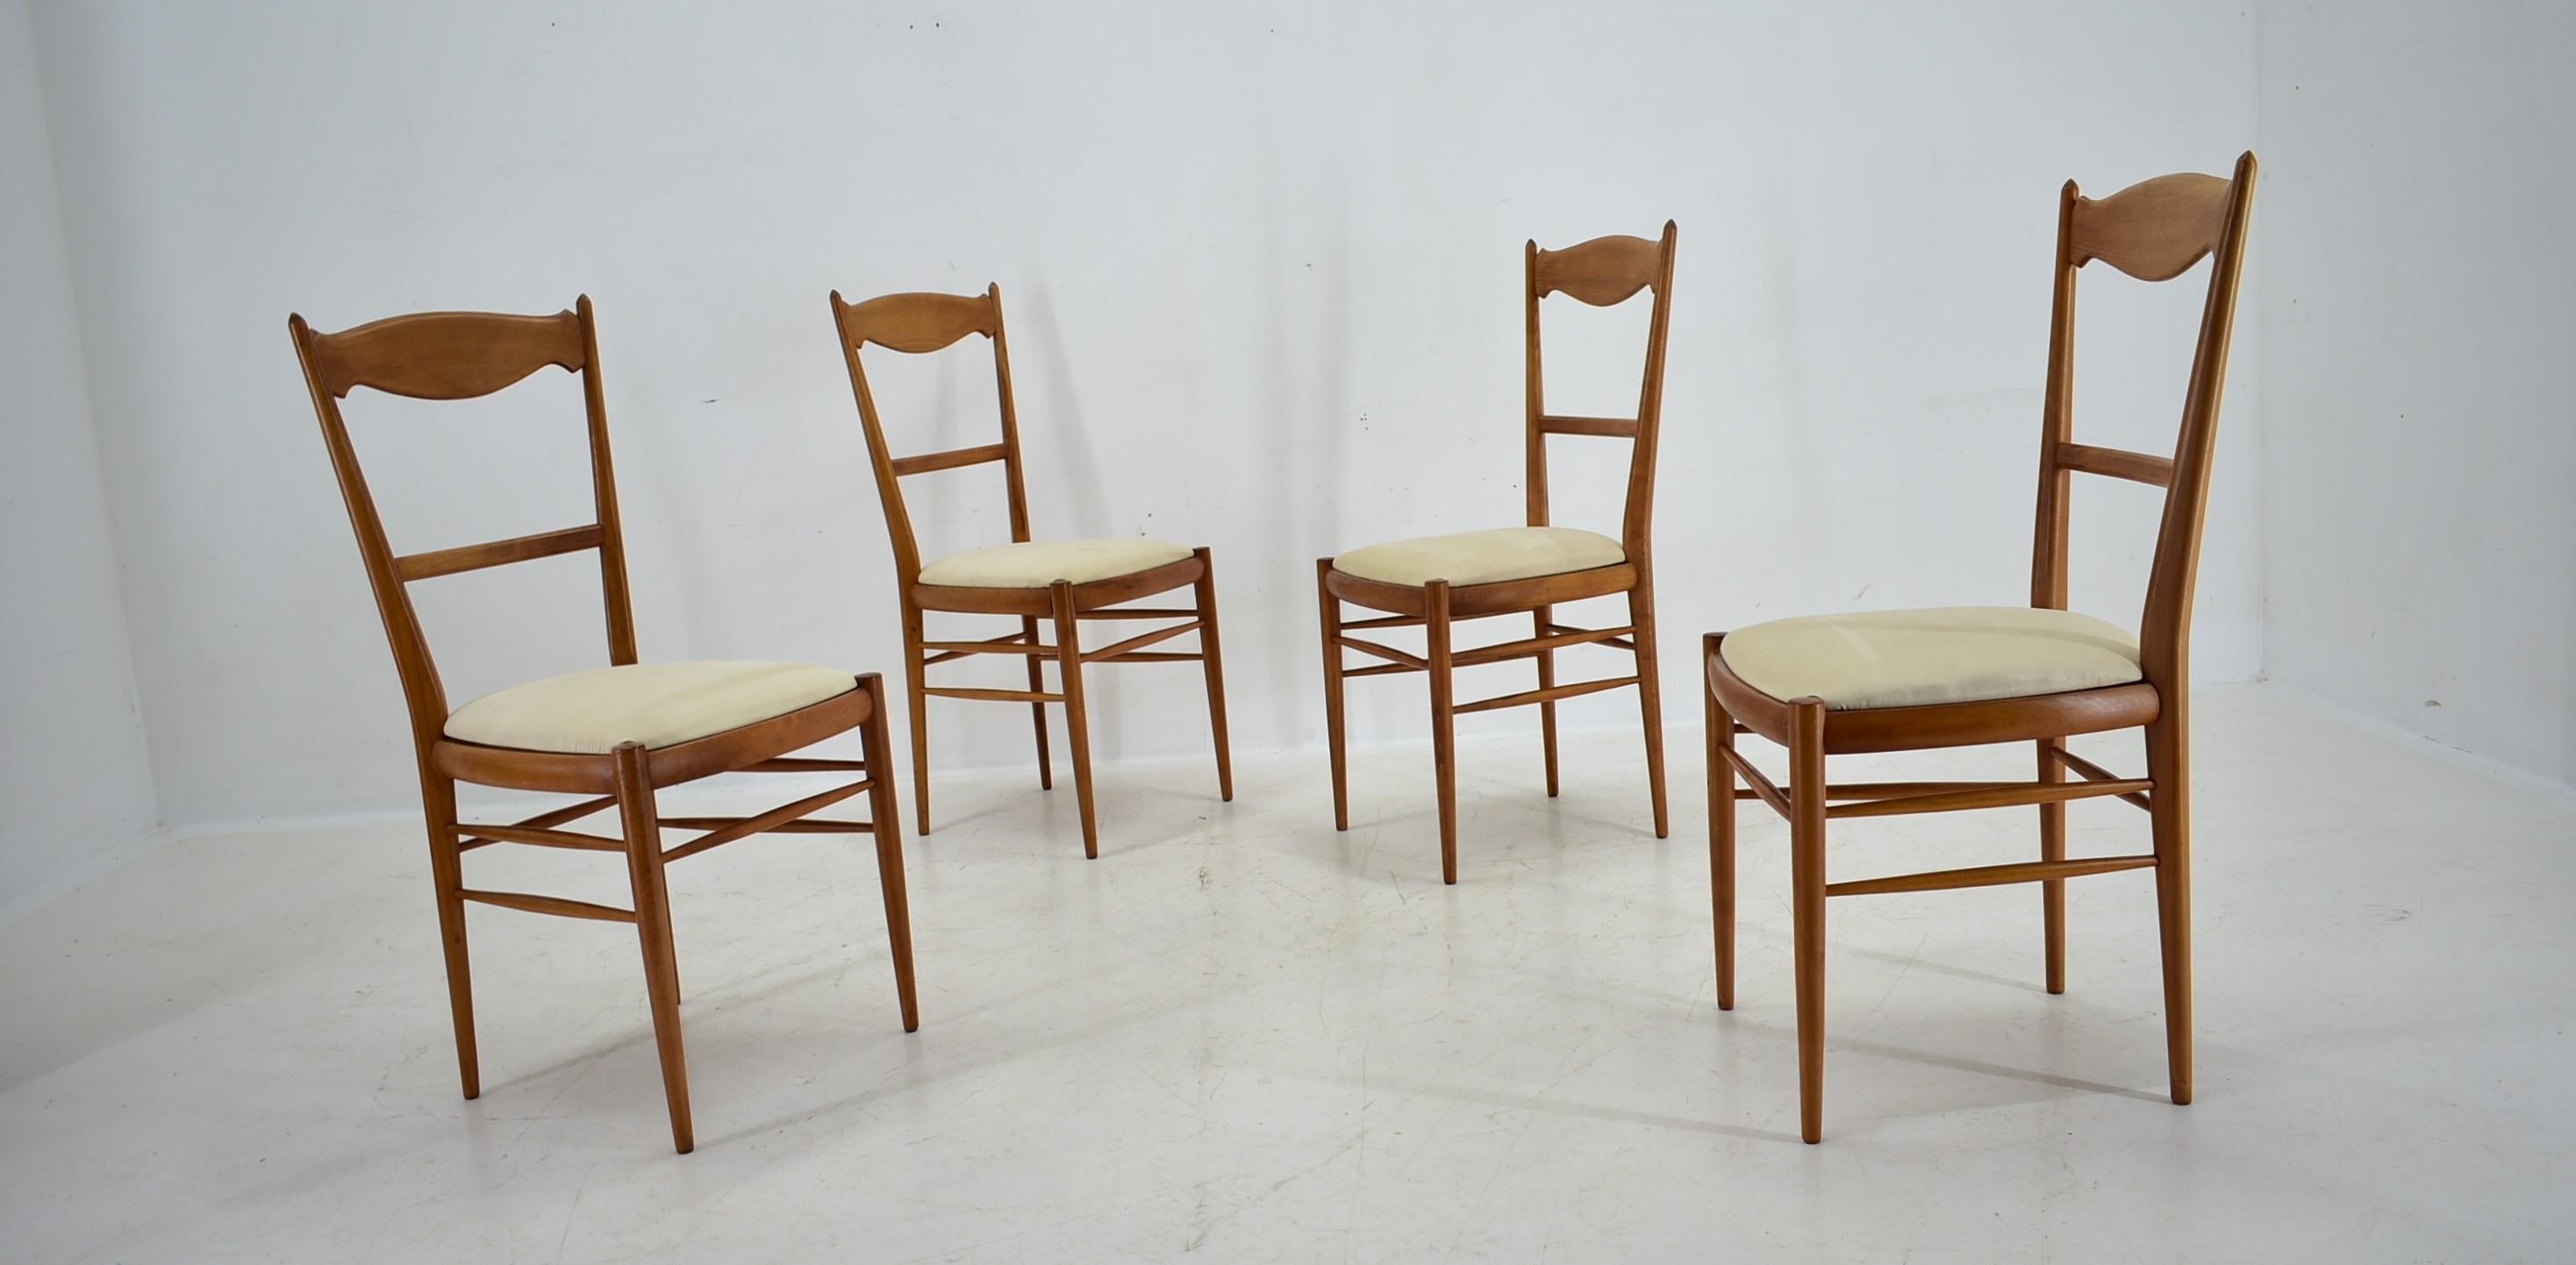 1970s Set of 4 Dining Chairs by Drevotvar, Czechoslovakia For Sale 5